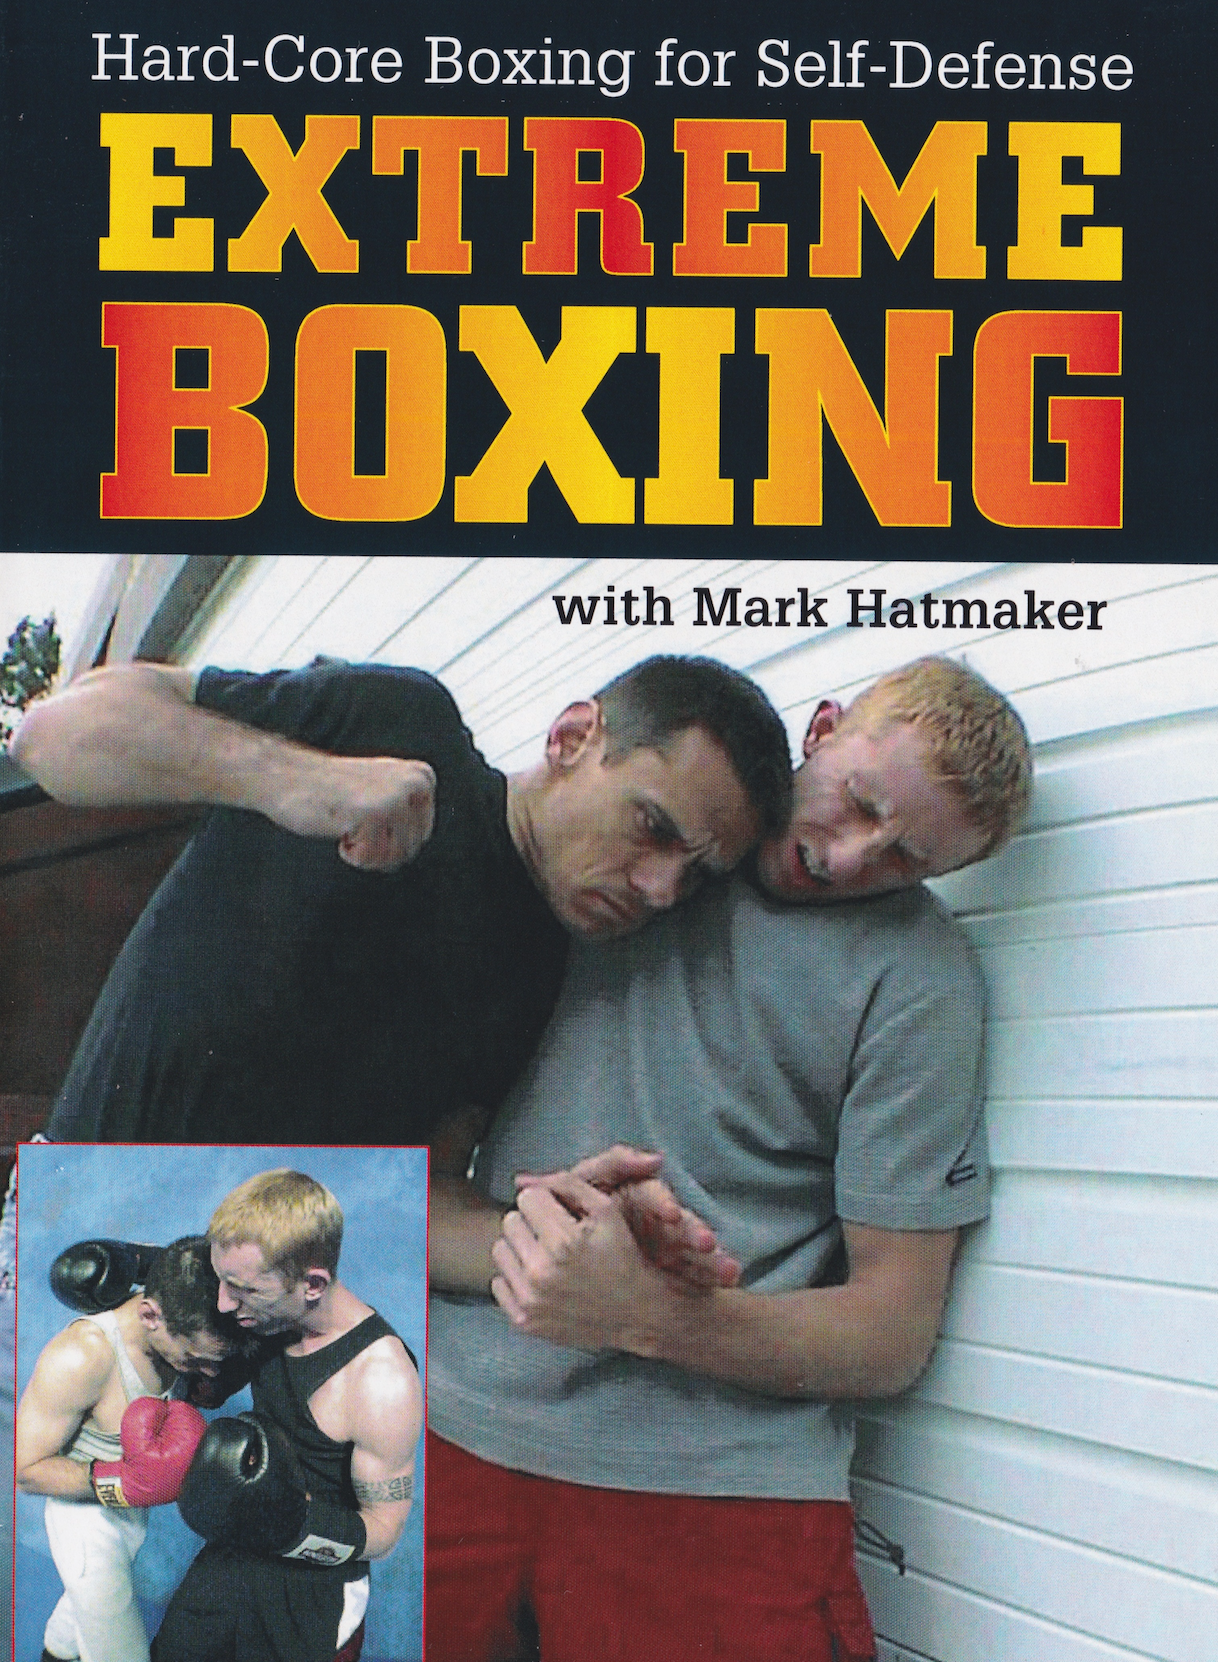 Extreme Boxing 2 DVD Set with Mark Hatmaker (Preowned)